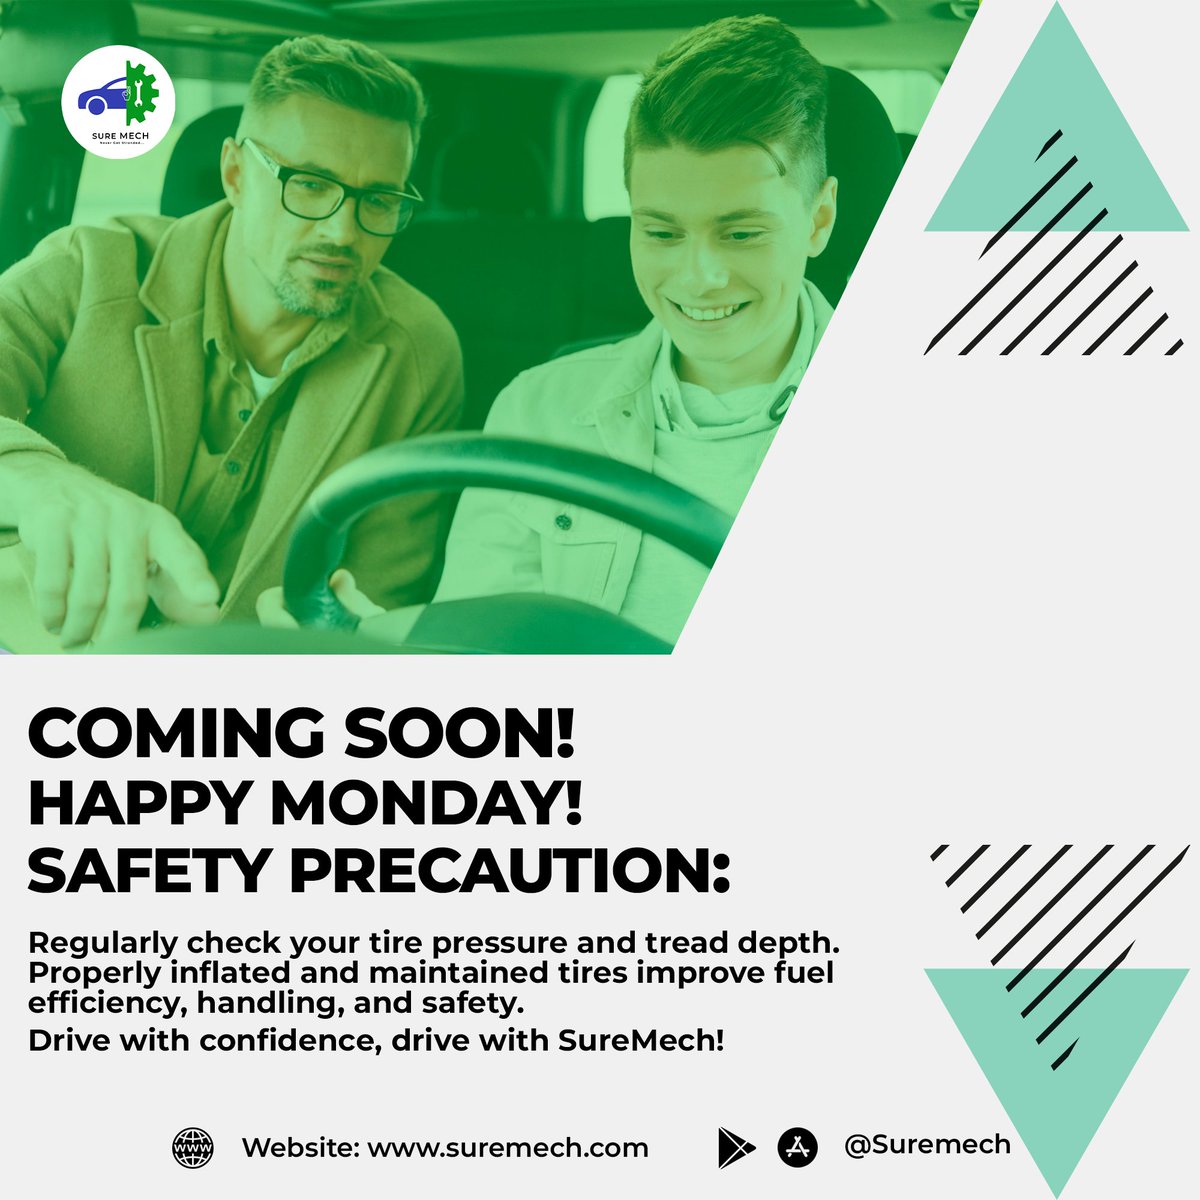 Happy Monday from SureMech! ✨🚗

We're excited to announce something special is coming soon! Stay tuned for updates. In the meantime, here's a quick safety tip to keep you and your vehicle safe on the road:
Safety Precaution Monday 🛠️✨
#suremech #carcare #safetyfirst